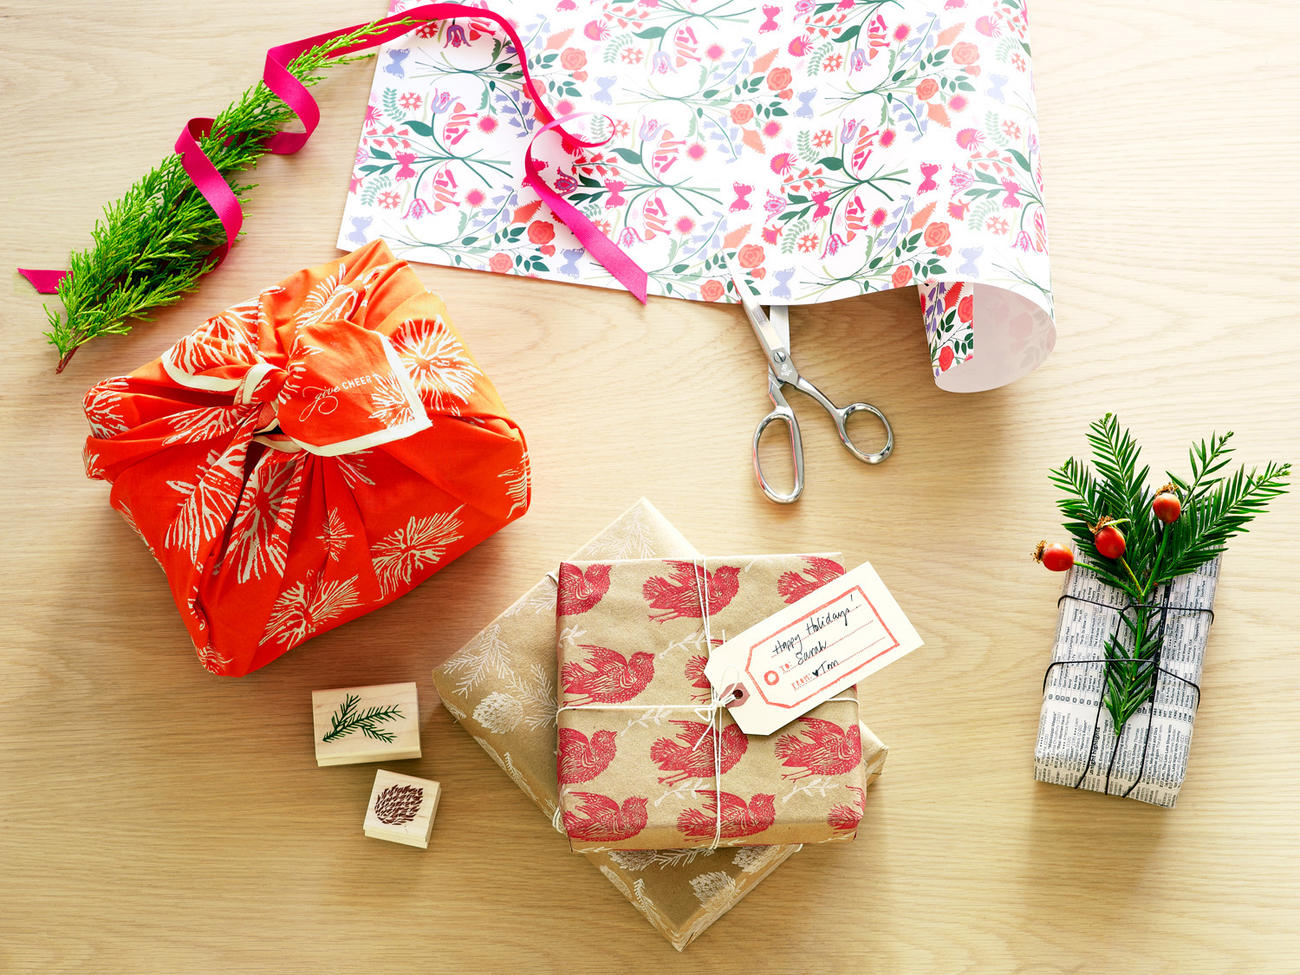 DIY Gift Wraps with Heart